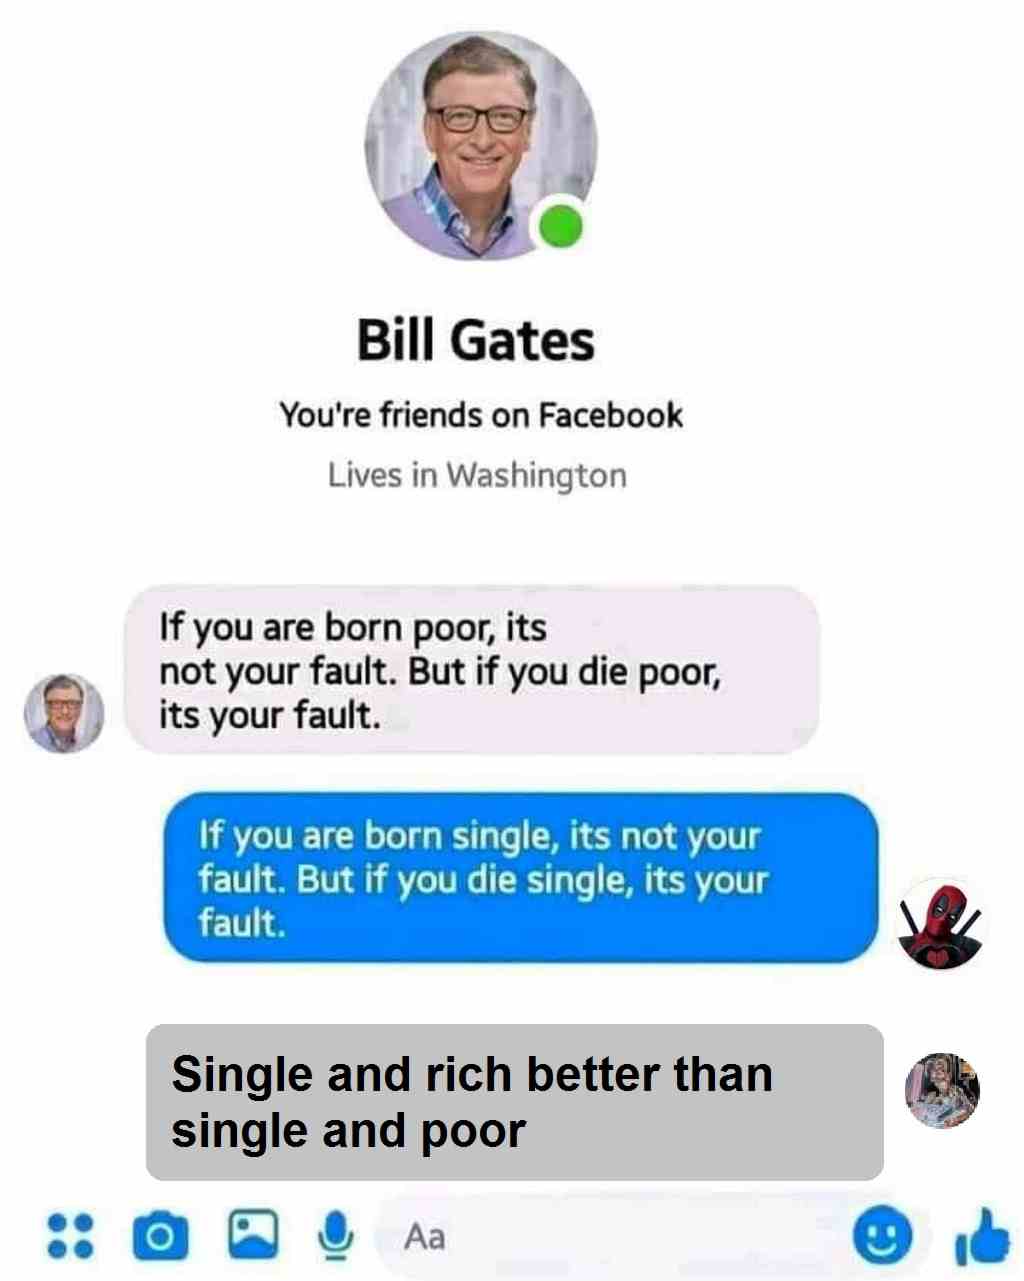 Perfect answer for Bill Gates